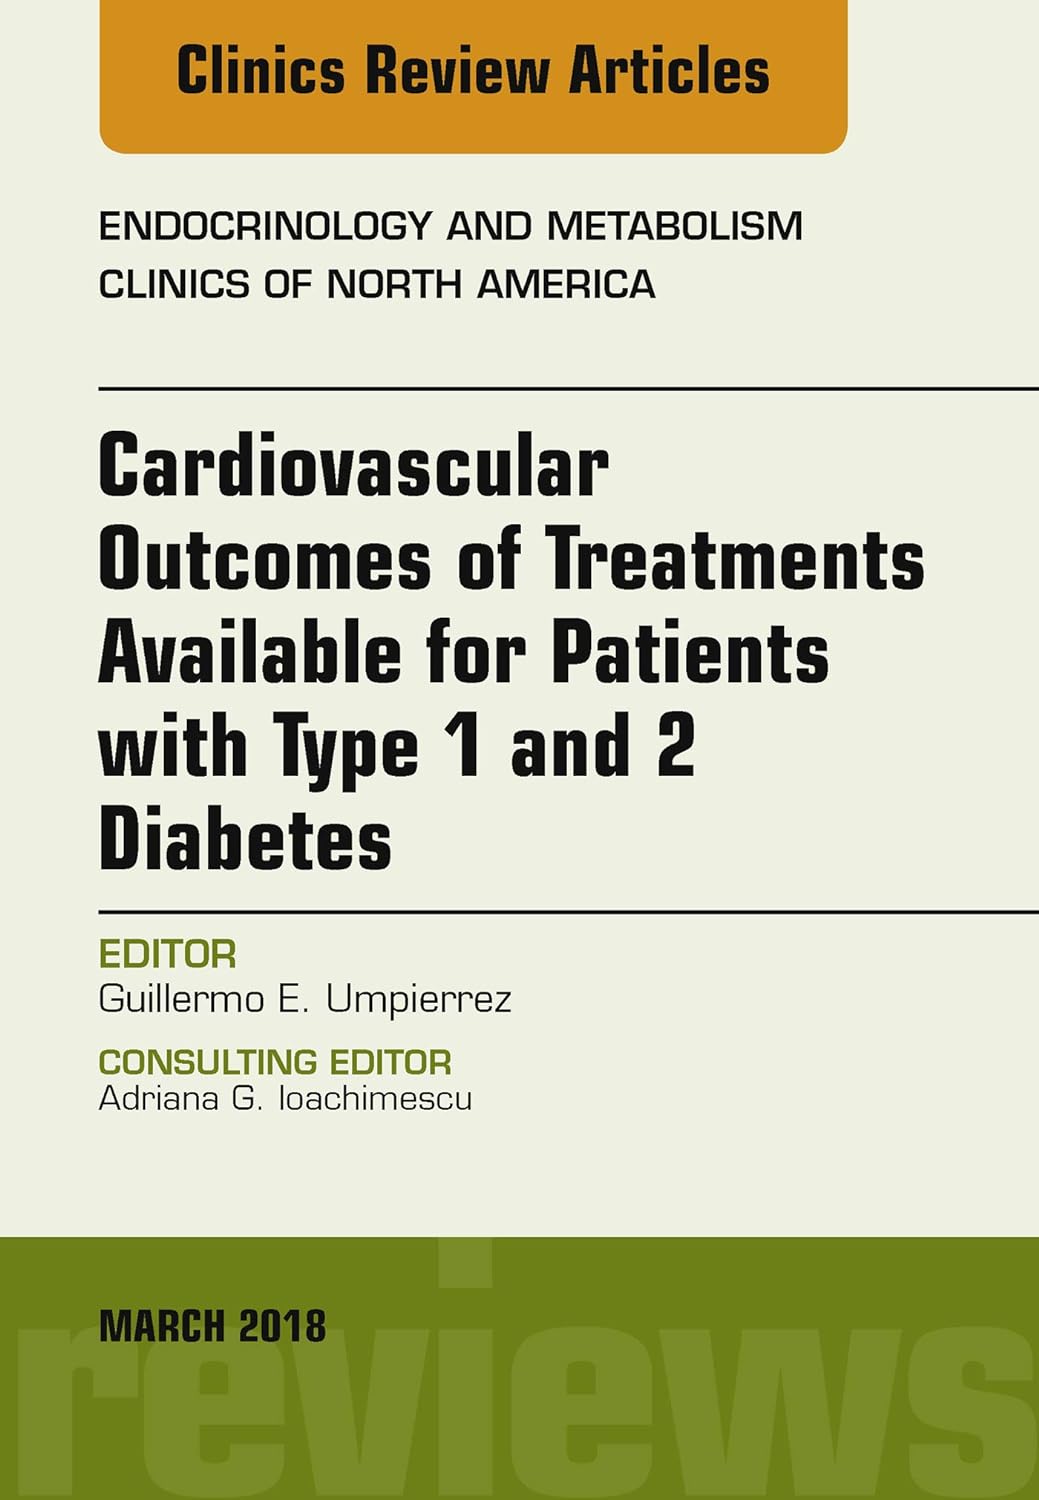 Cardiovascular Outcomes of Treatments available for Patients with Type 1 and 2 Diabetes, An Issue of Endocrinology and Metabolism Clinics of North ... (The Clinics: Internal Medicine, Volume 47-1)  by Guillermo E. Umpierrez 